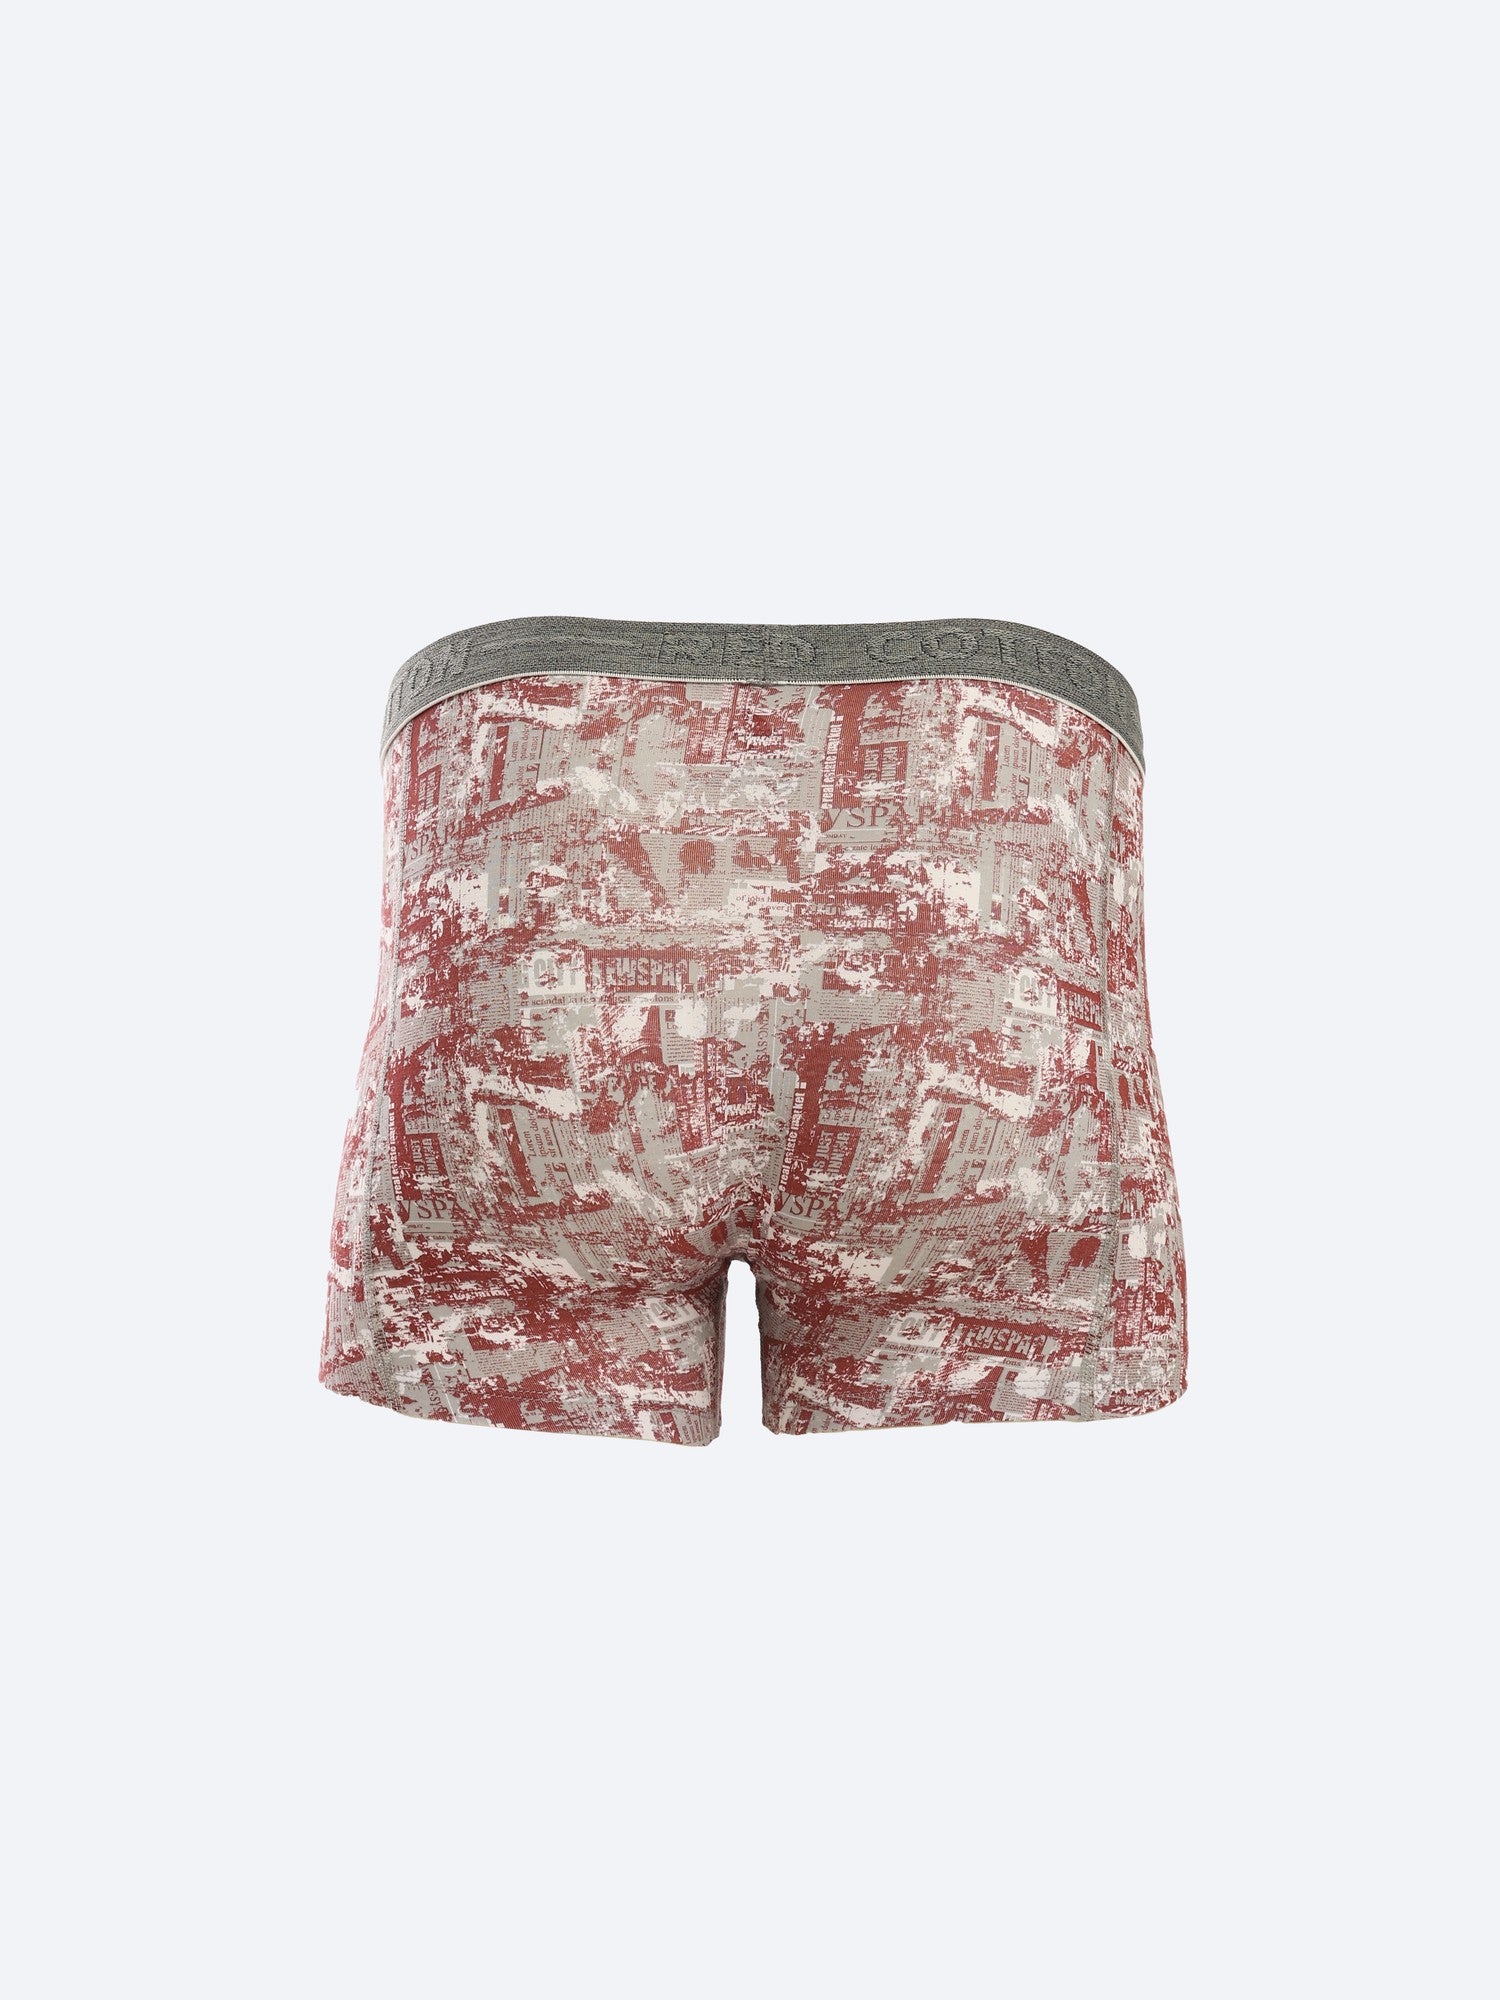 Boxer for men printed from Redcotton